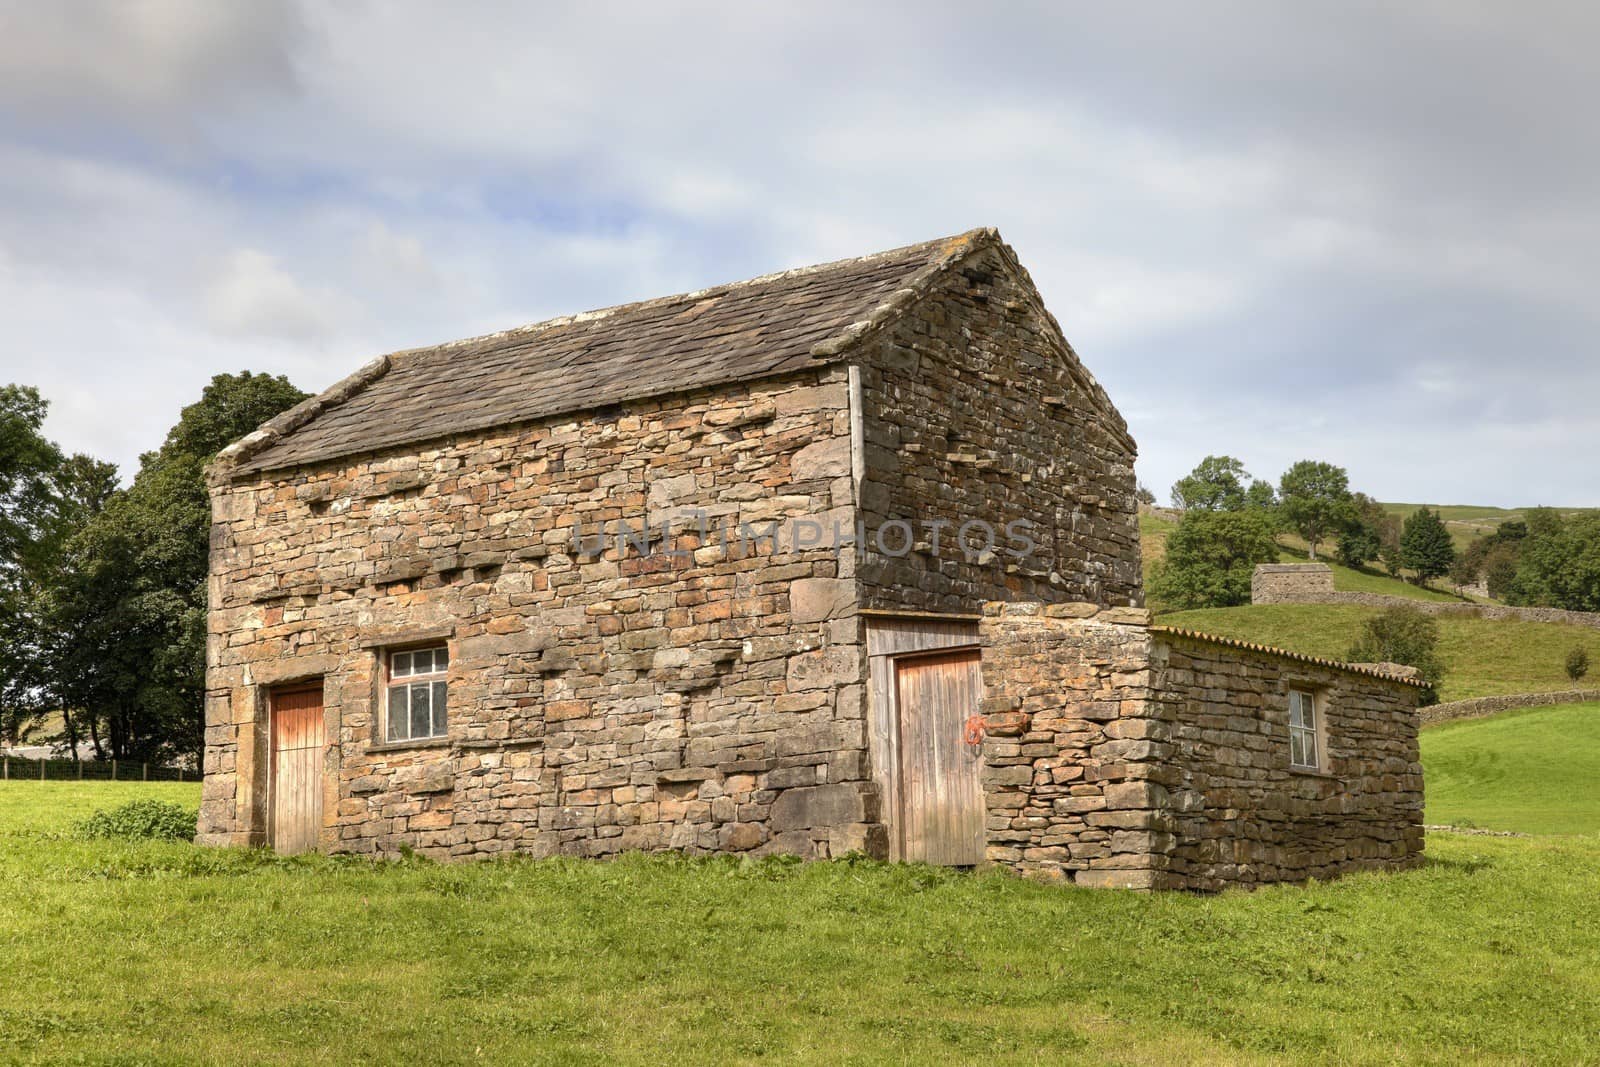 Field barn near the Yorkshire Dales village of Muker, Swaledale, Yorkshire, England.